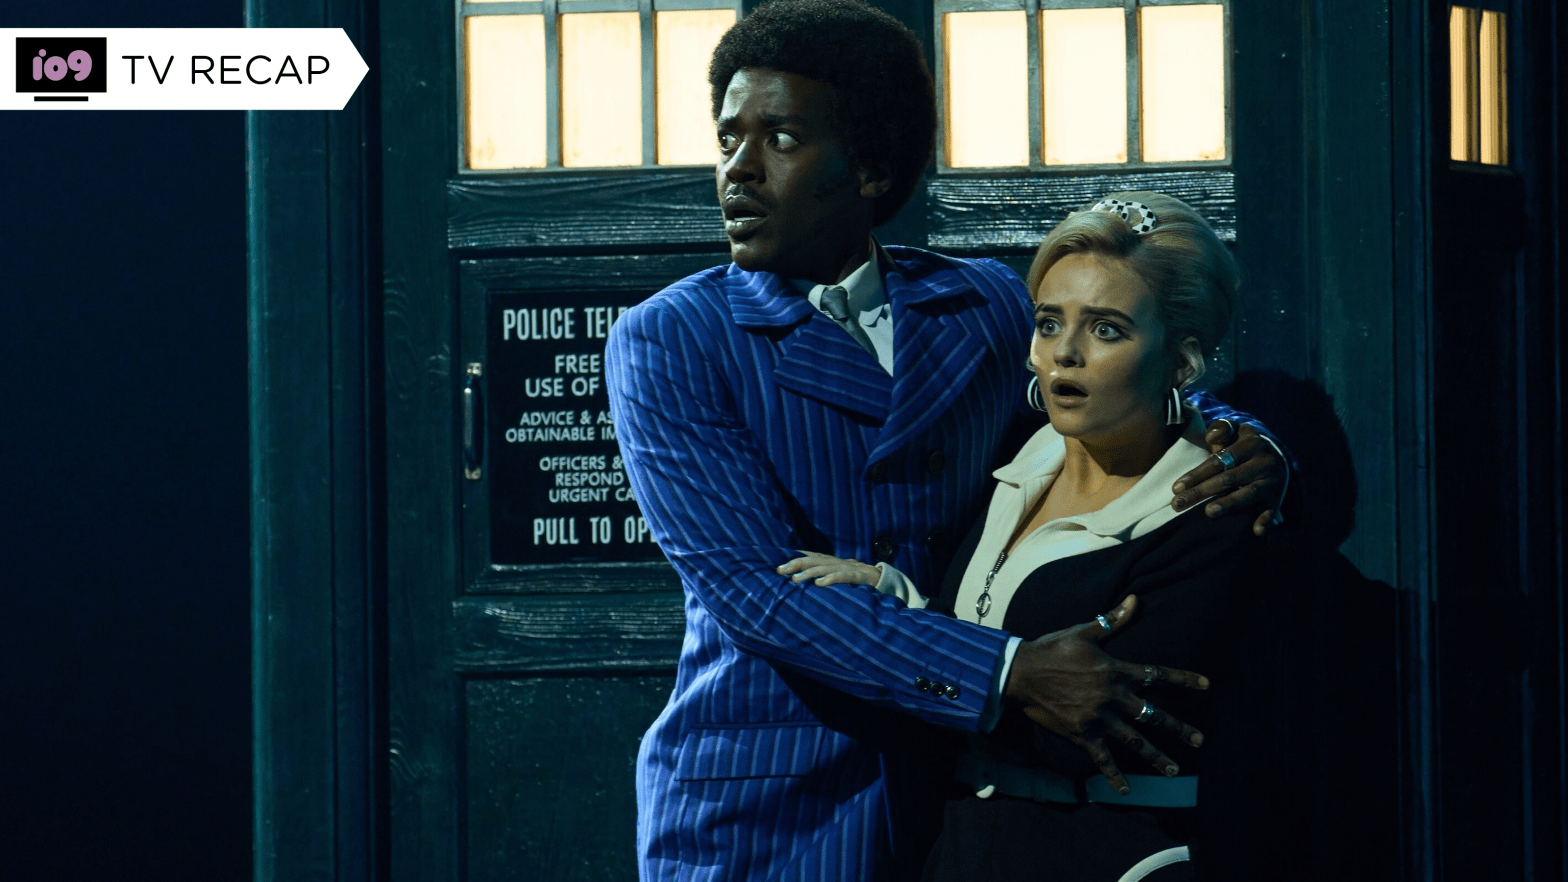 Doctor Who Returns to Remind Us We’re All Stories, in the End